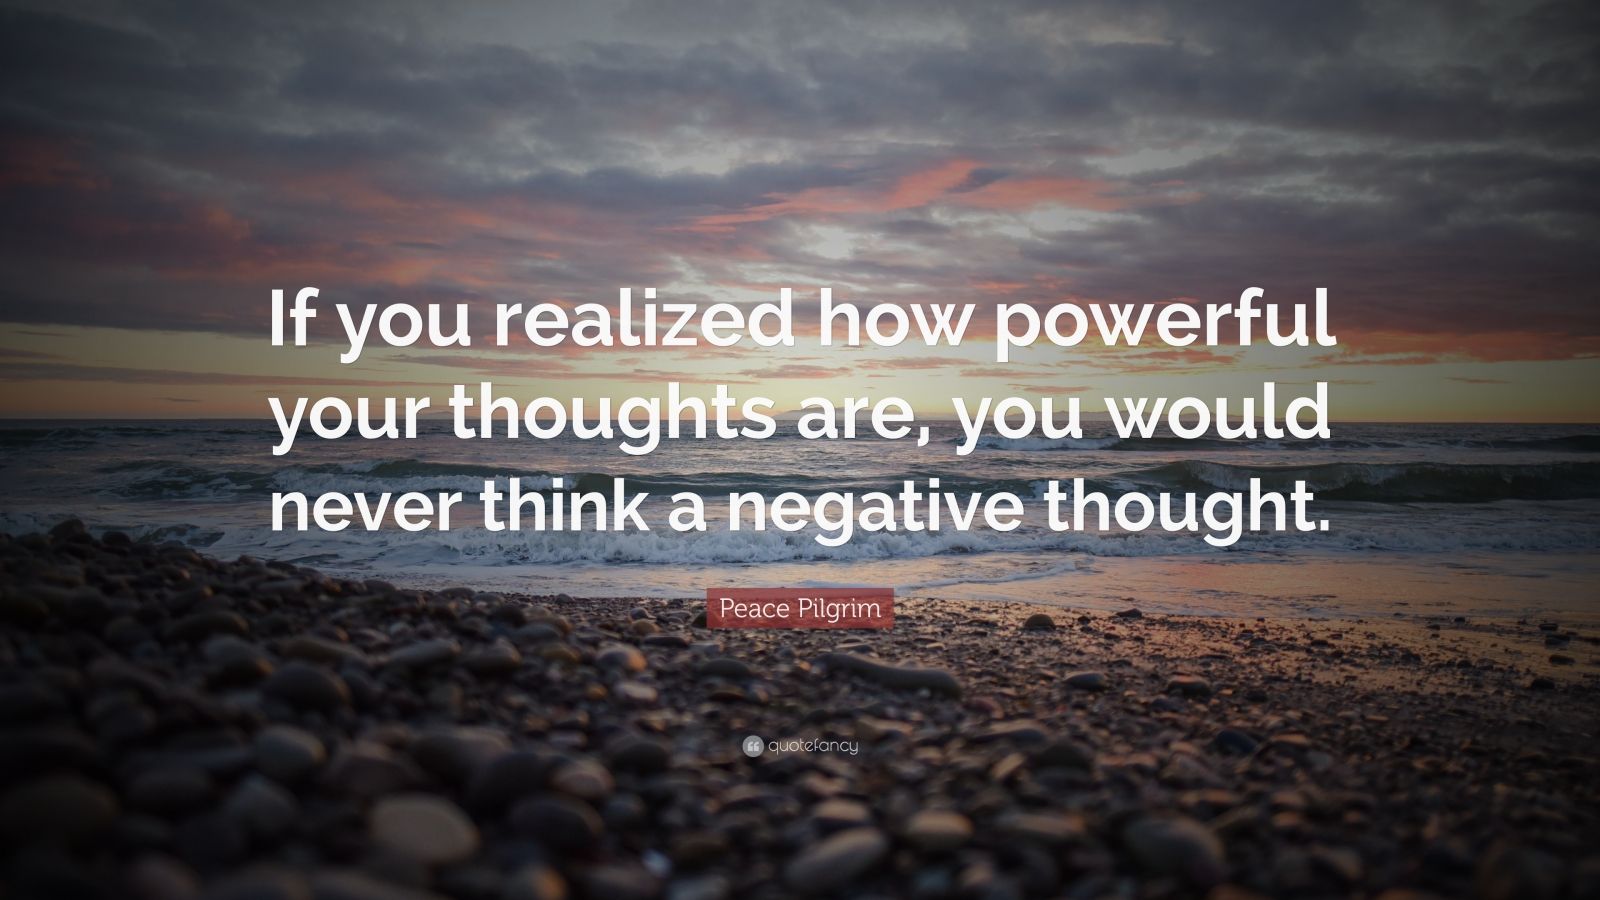 Peace Pilgrim Quote: “If you realized how powerful your thoughts are